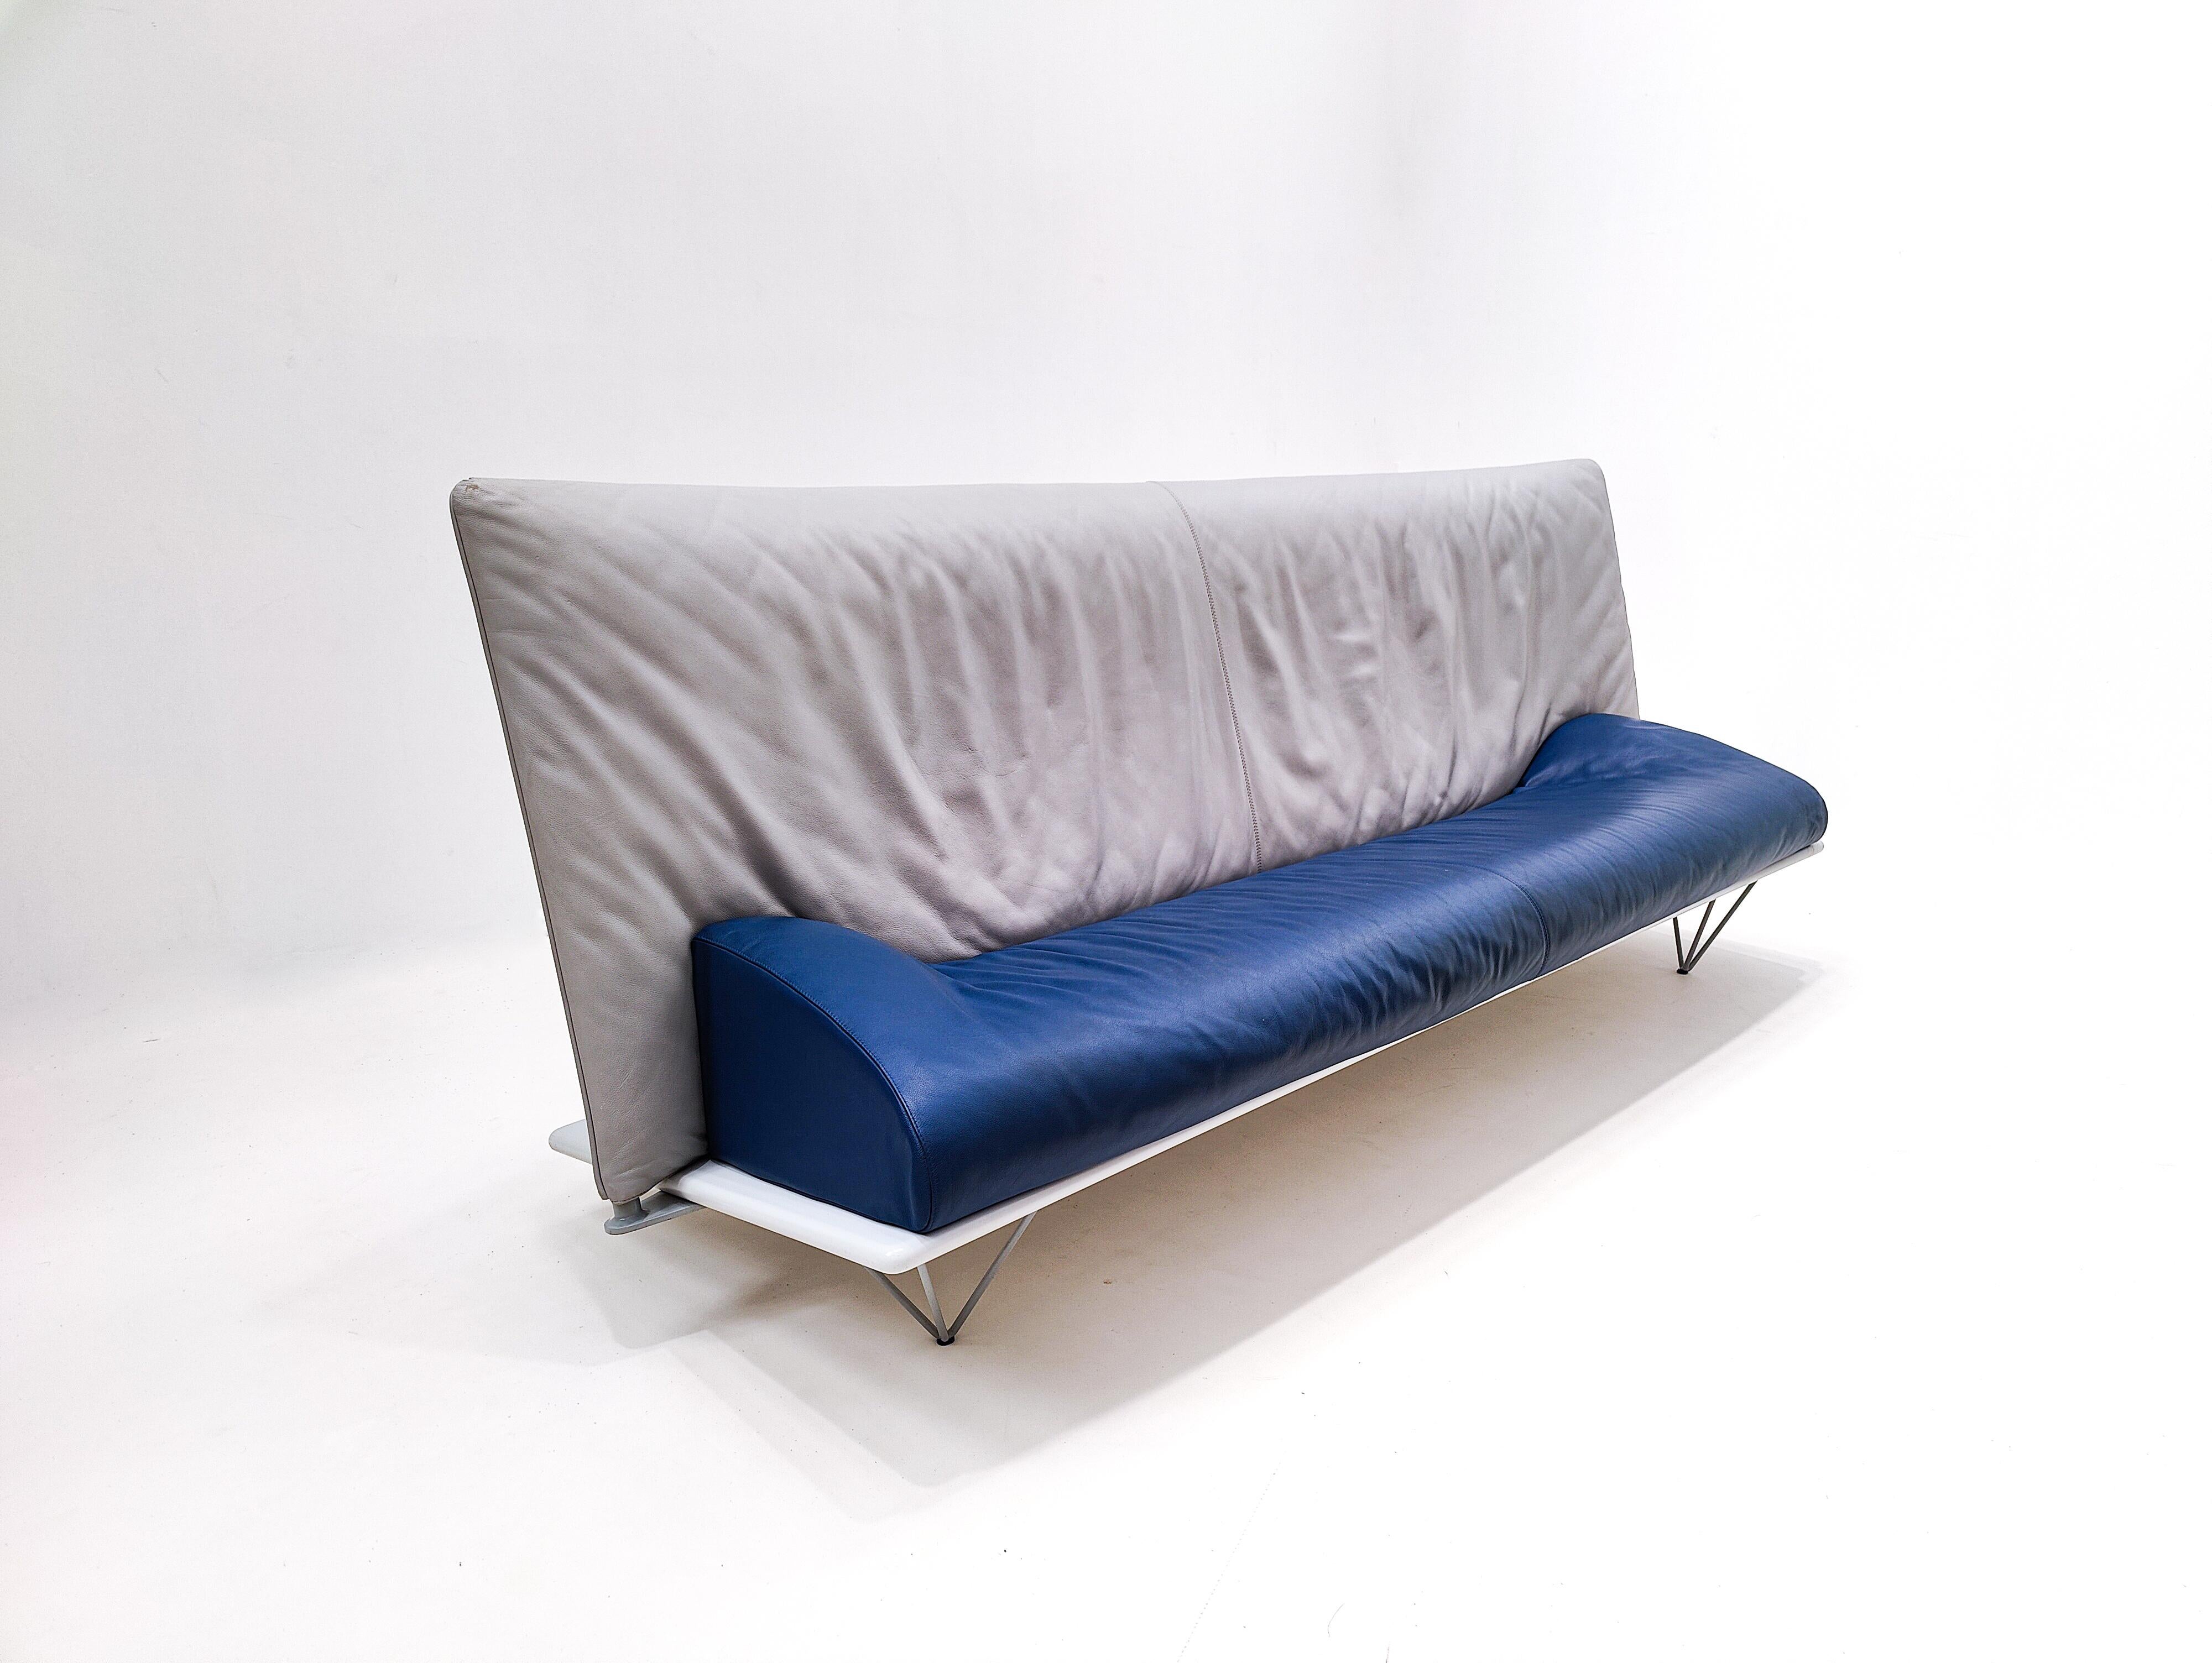 Rare leather “Squash” sofa by Paolo Deganello for Driade, Italy, 1980s.